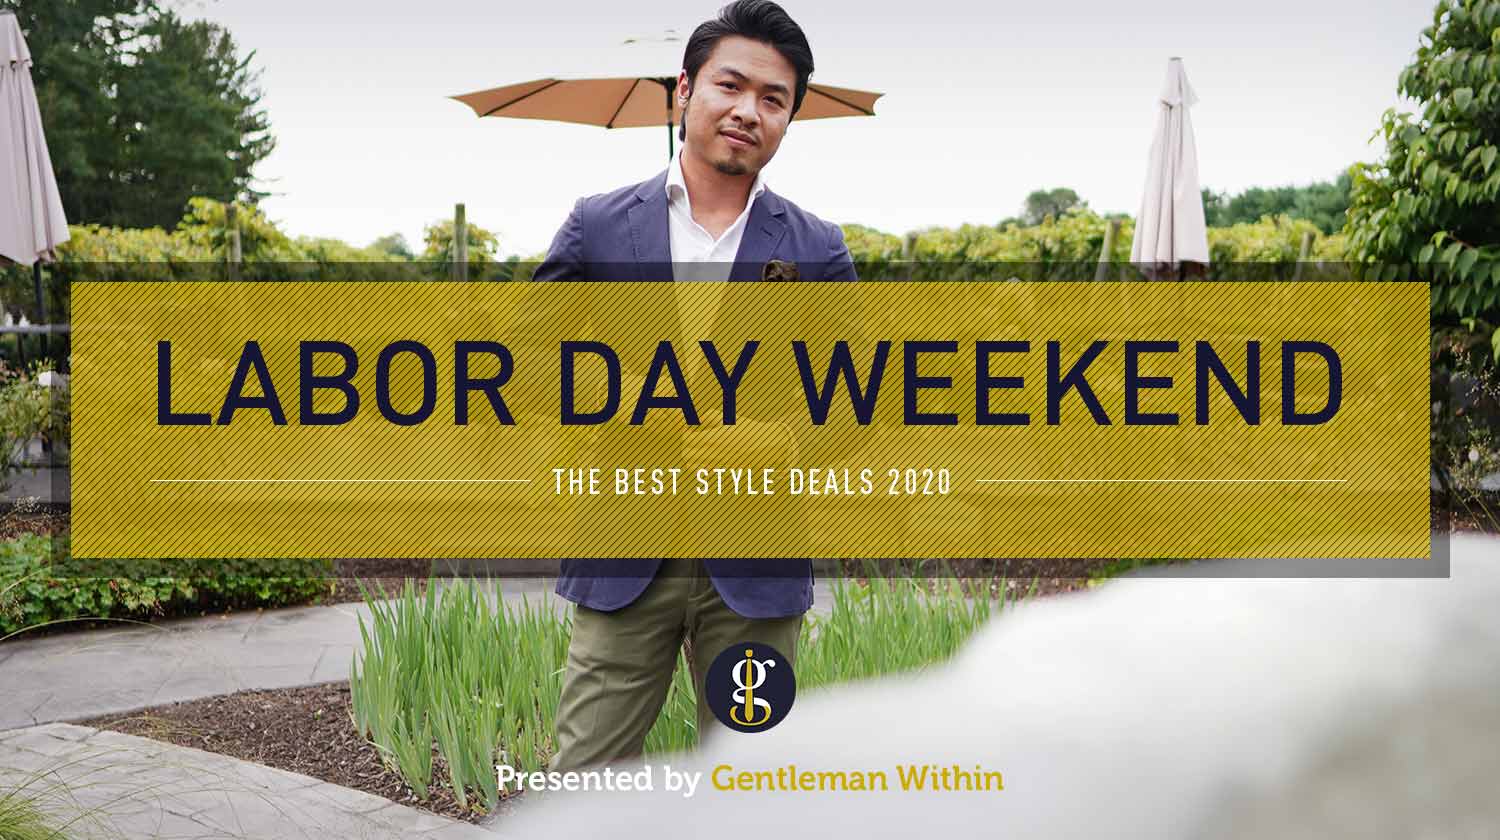 A Long List of Labor Day Weekend Style Deals 2020 (So Long Summer!) | GENTLEMAN WITHIN